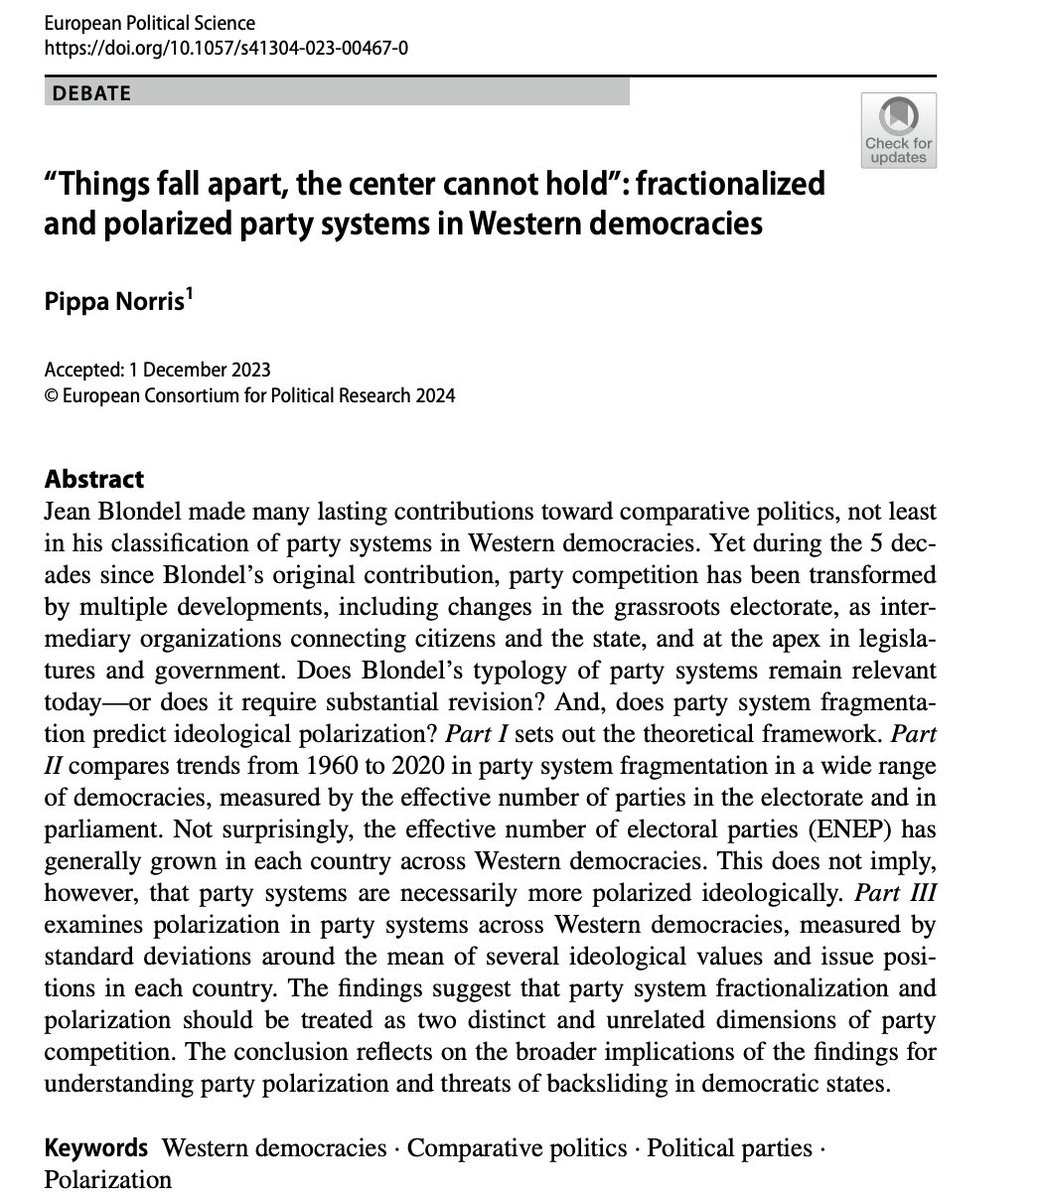 New EPS article just out! Why party systems in Western democracies have become more fragmented since the 1960s and yet not necessarily more ideologically polarized. link.springer.com/article/10.105…